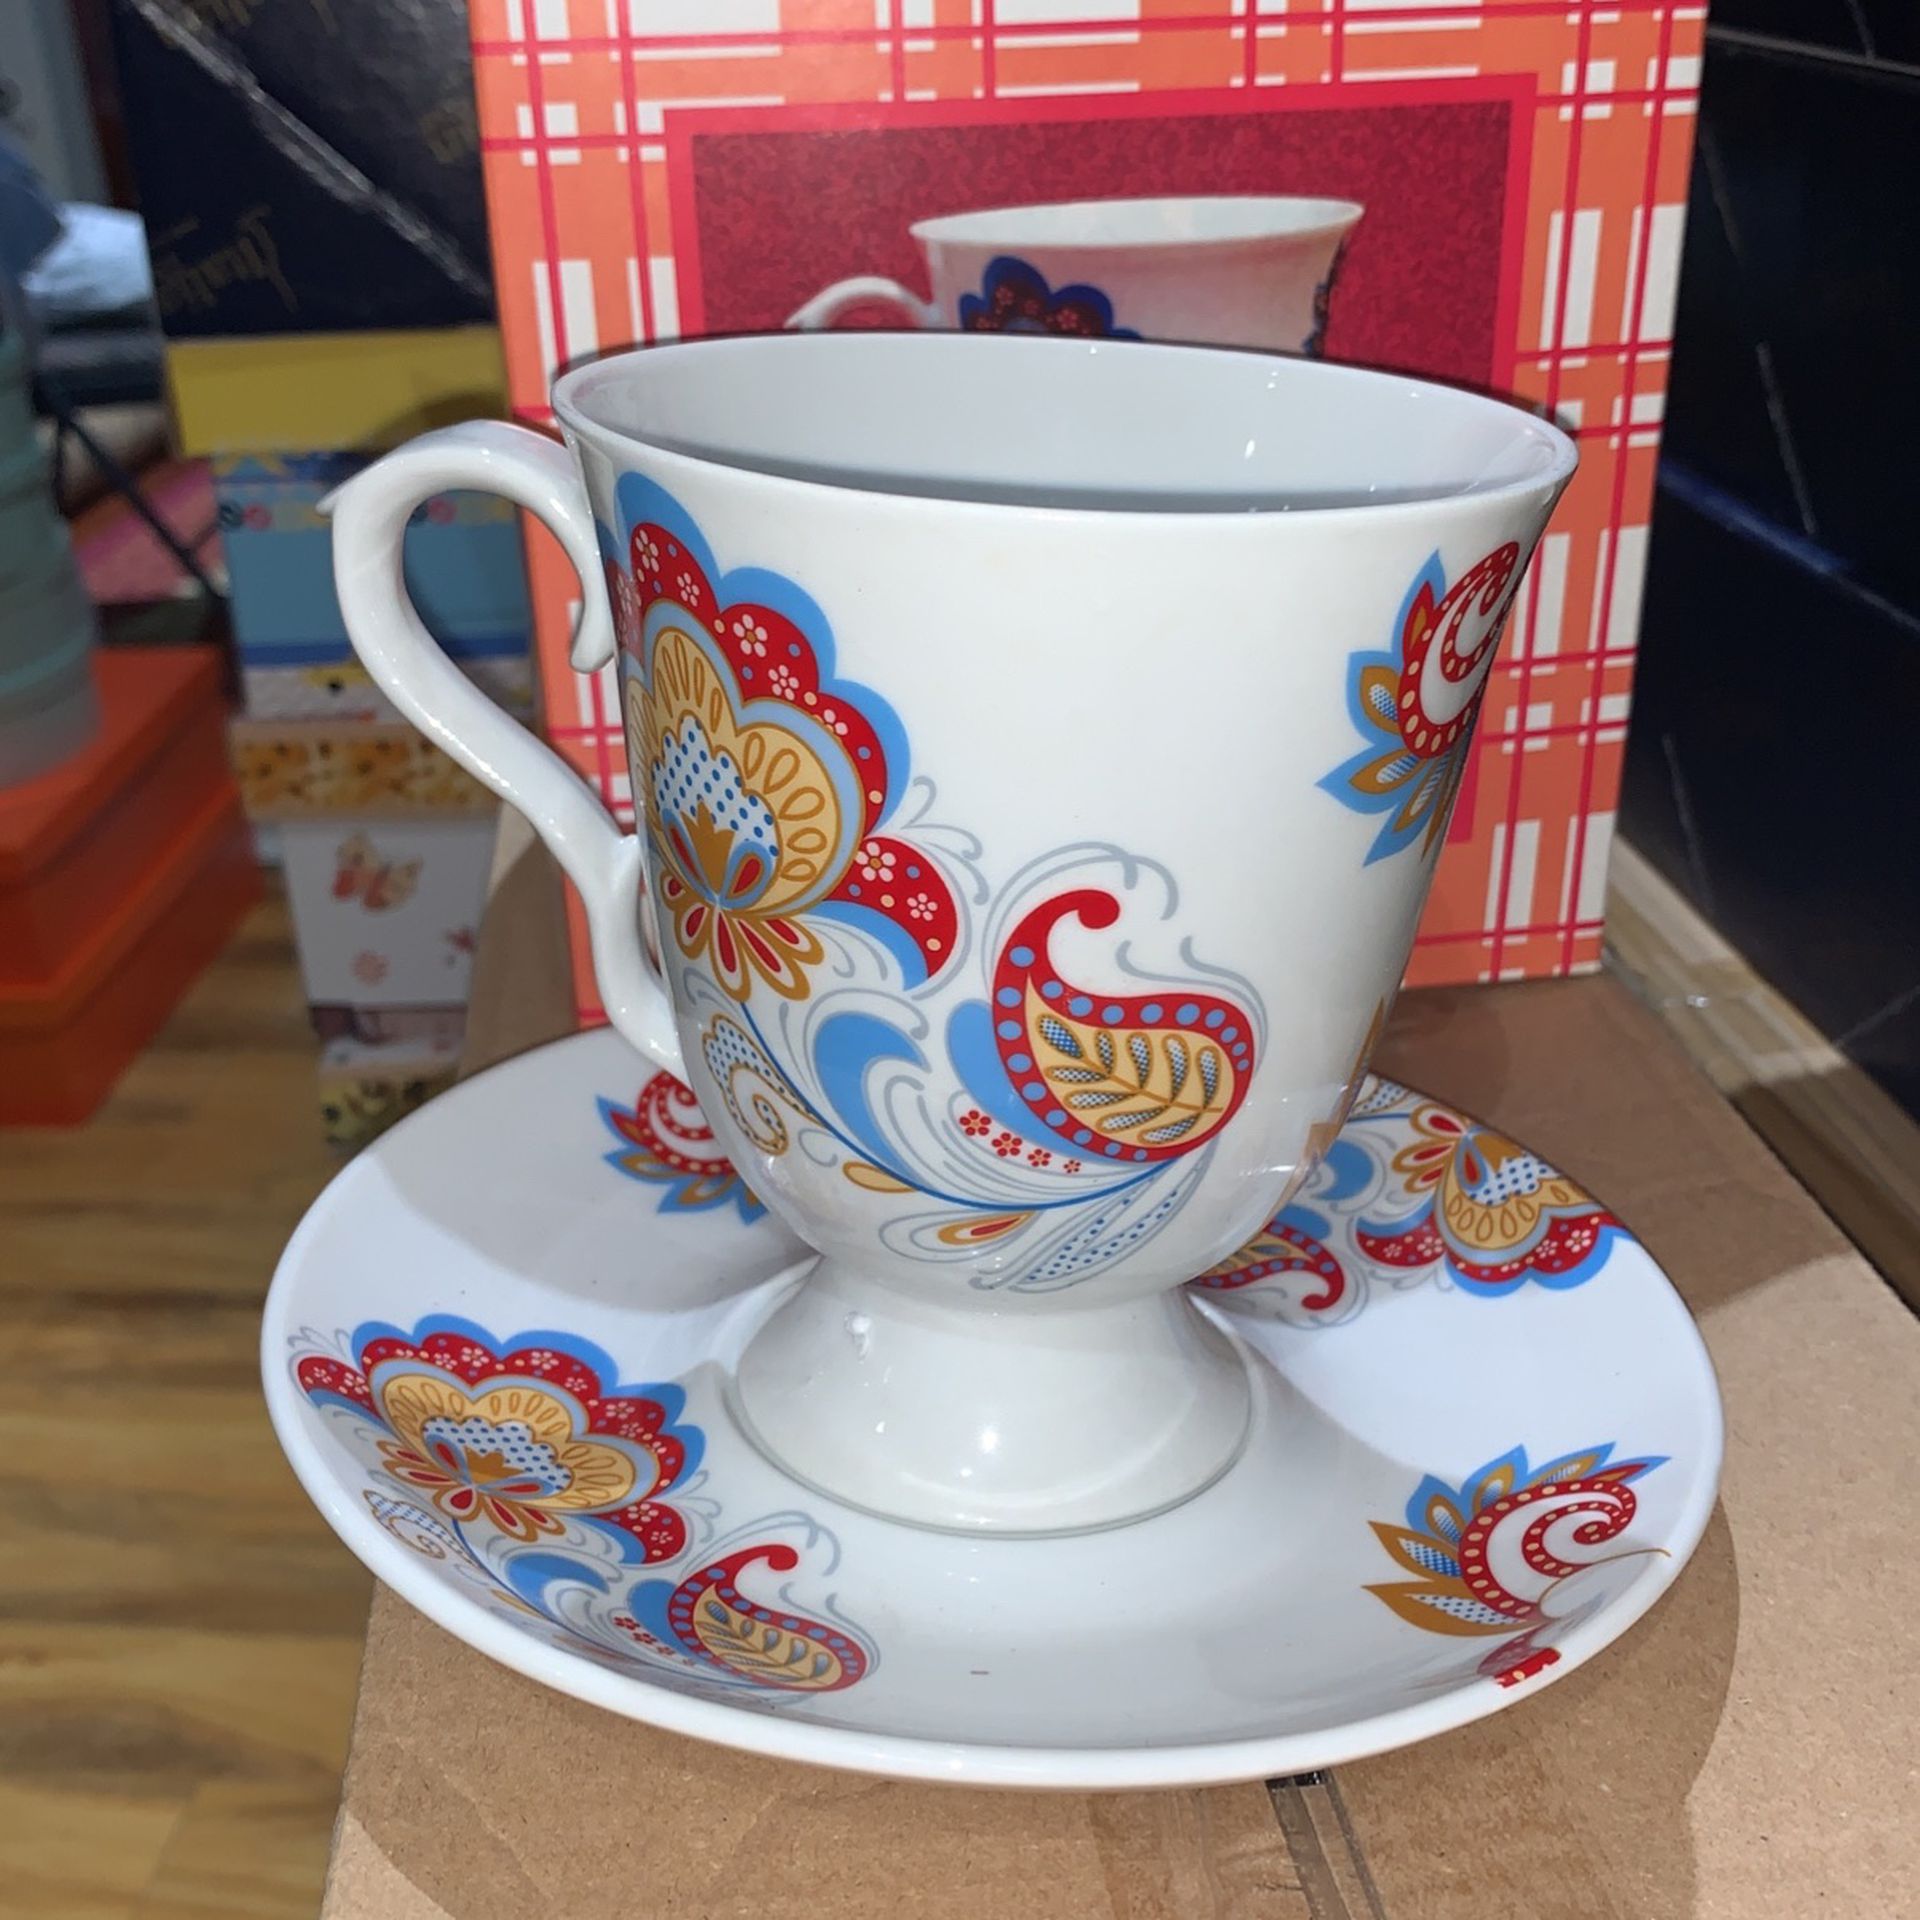 New In Box Tea Set, 2pcs, Saucer and a Cup